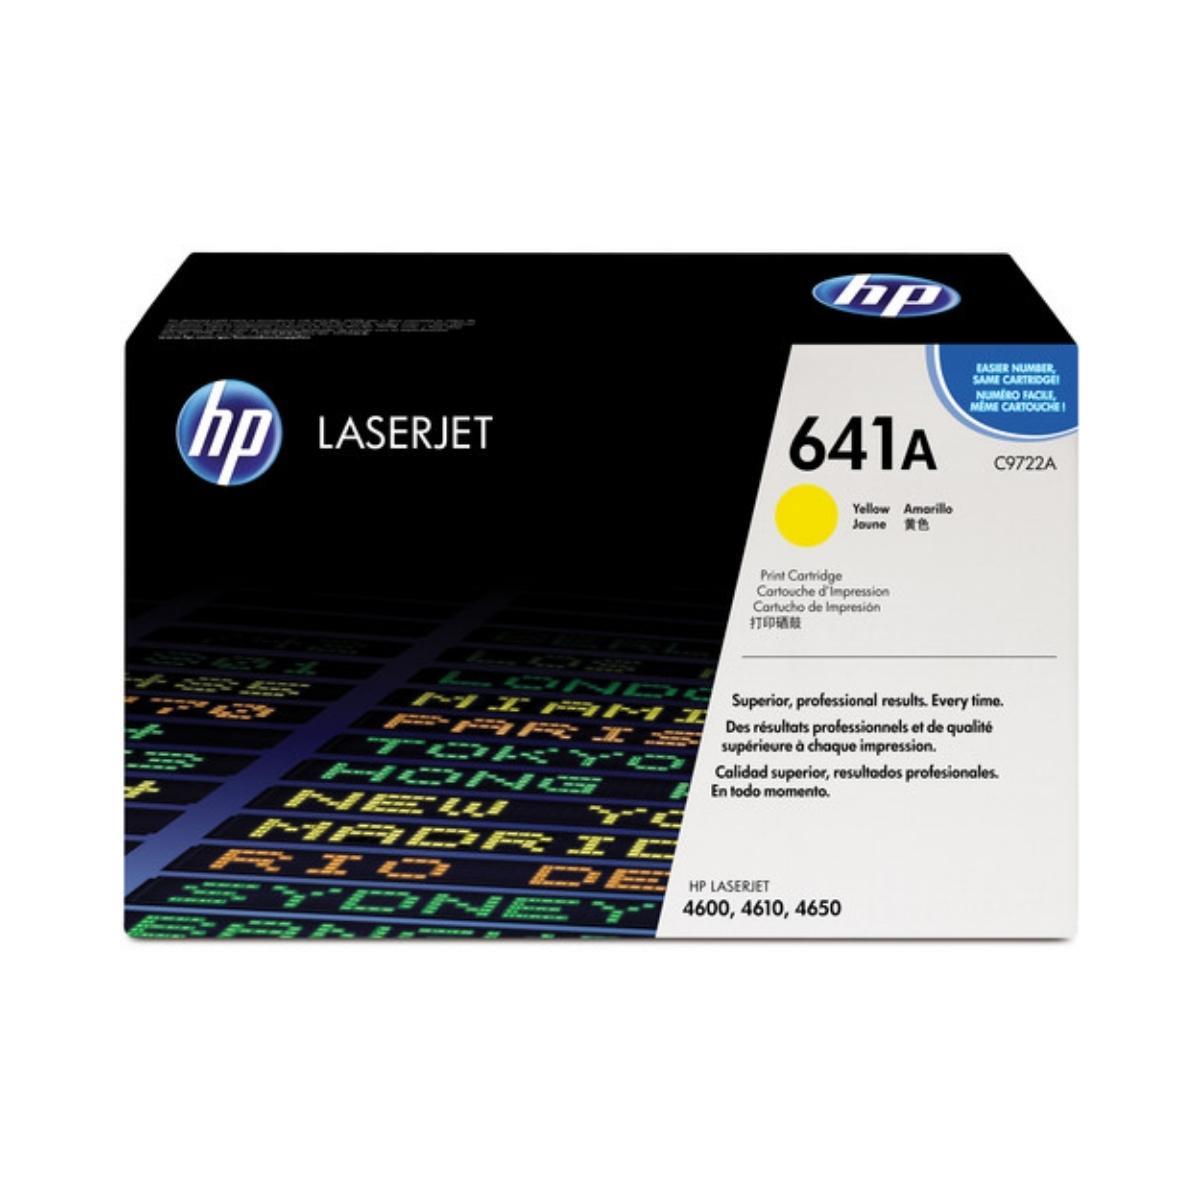 

HP C9722A Yellow Cartridge for Color LaserJet Printers